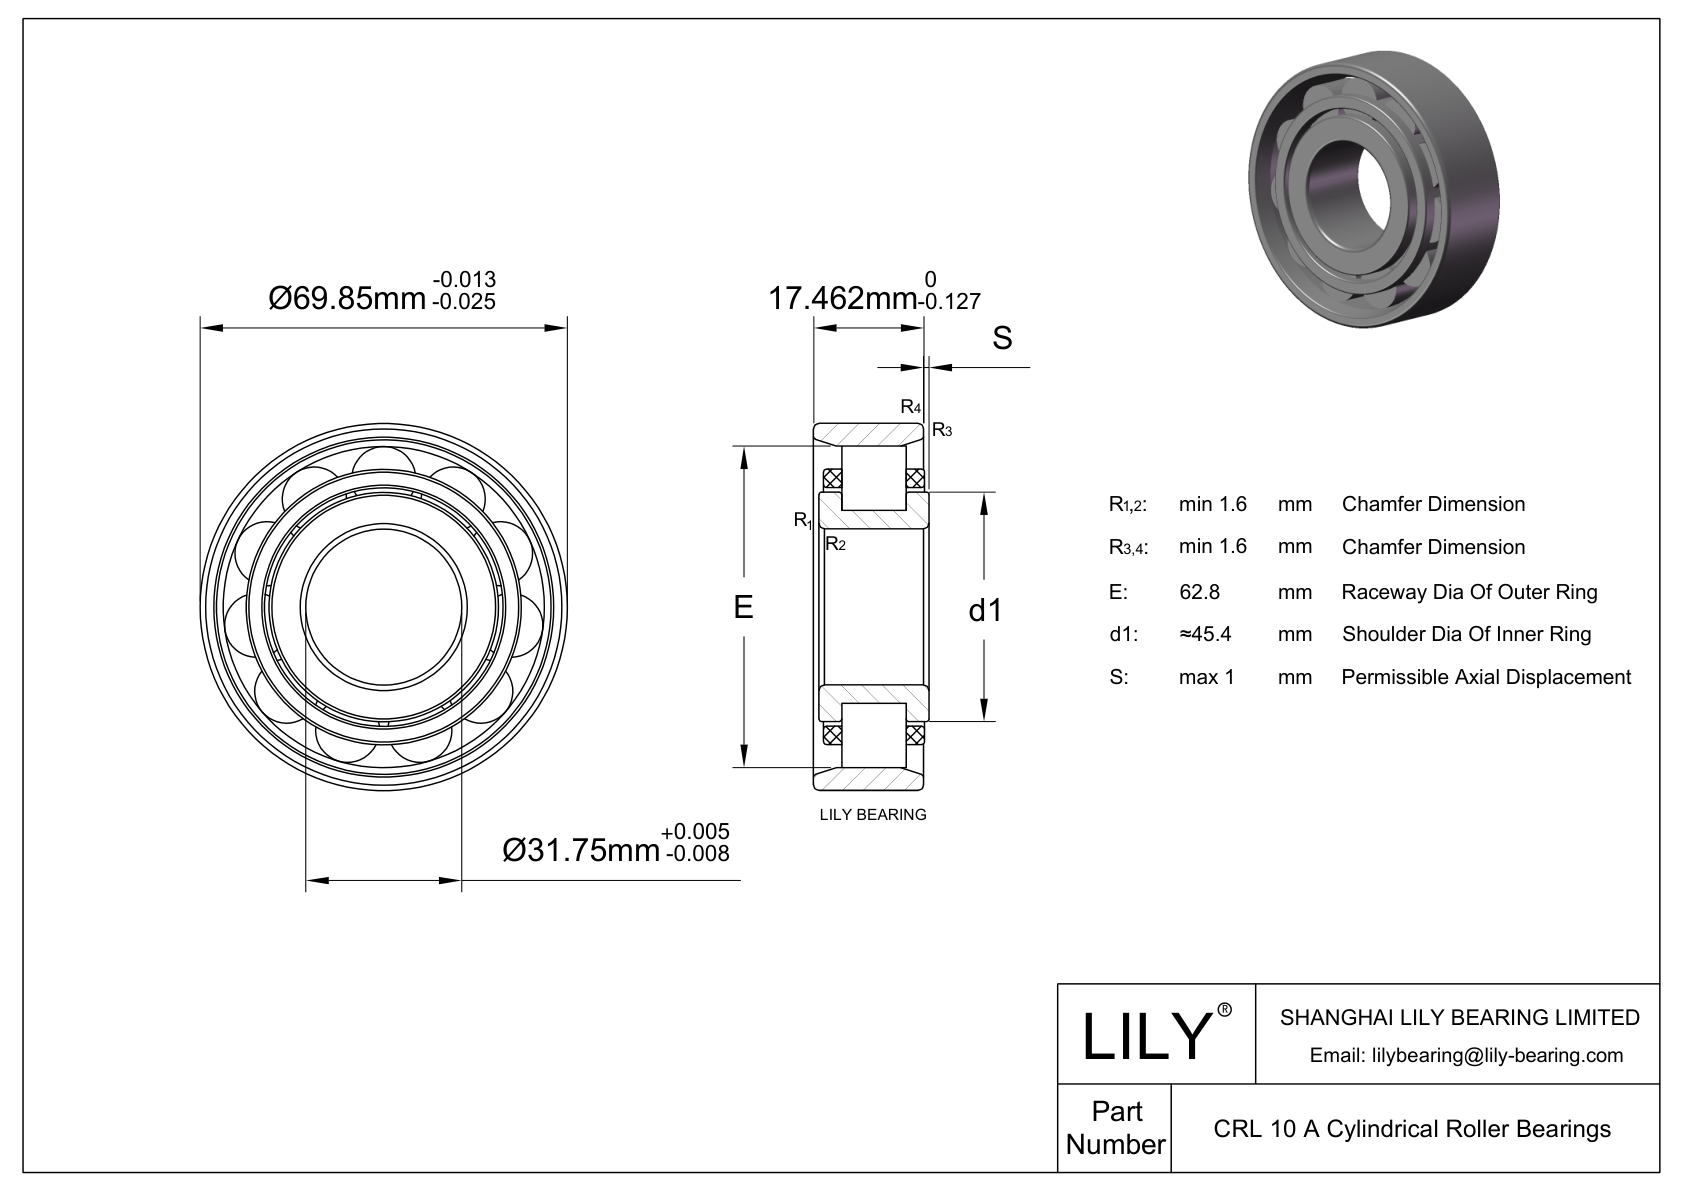 CRL 10 A Single Row Cylindrical Roller Bearings With Inner Ring cad drawing